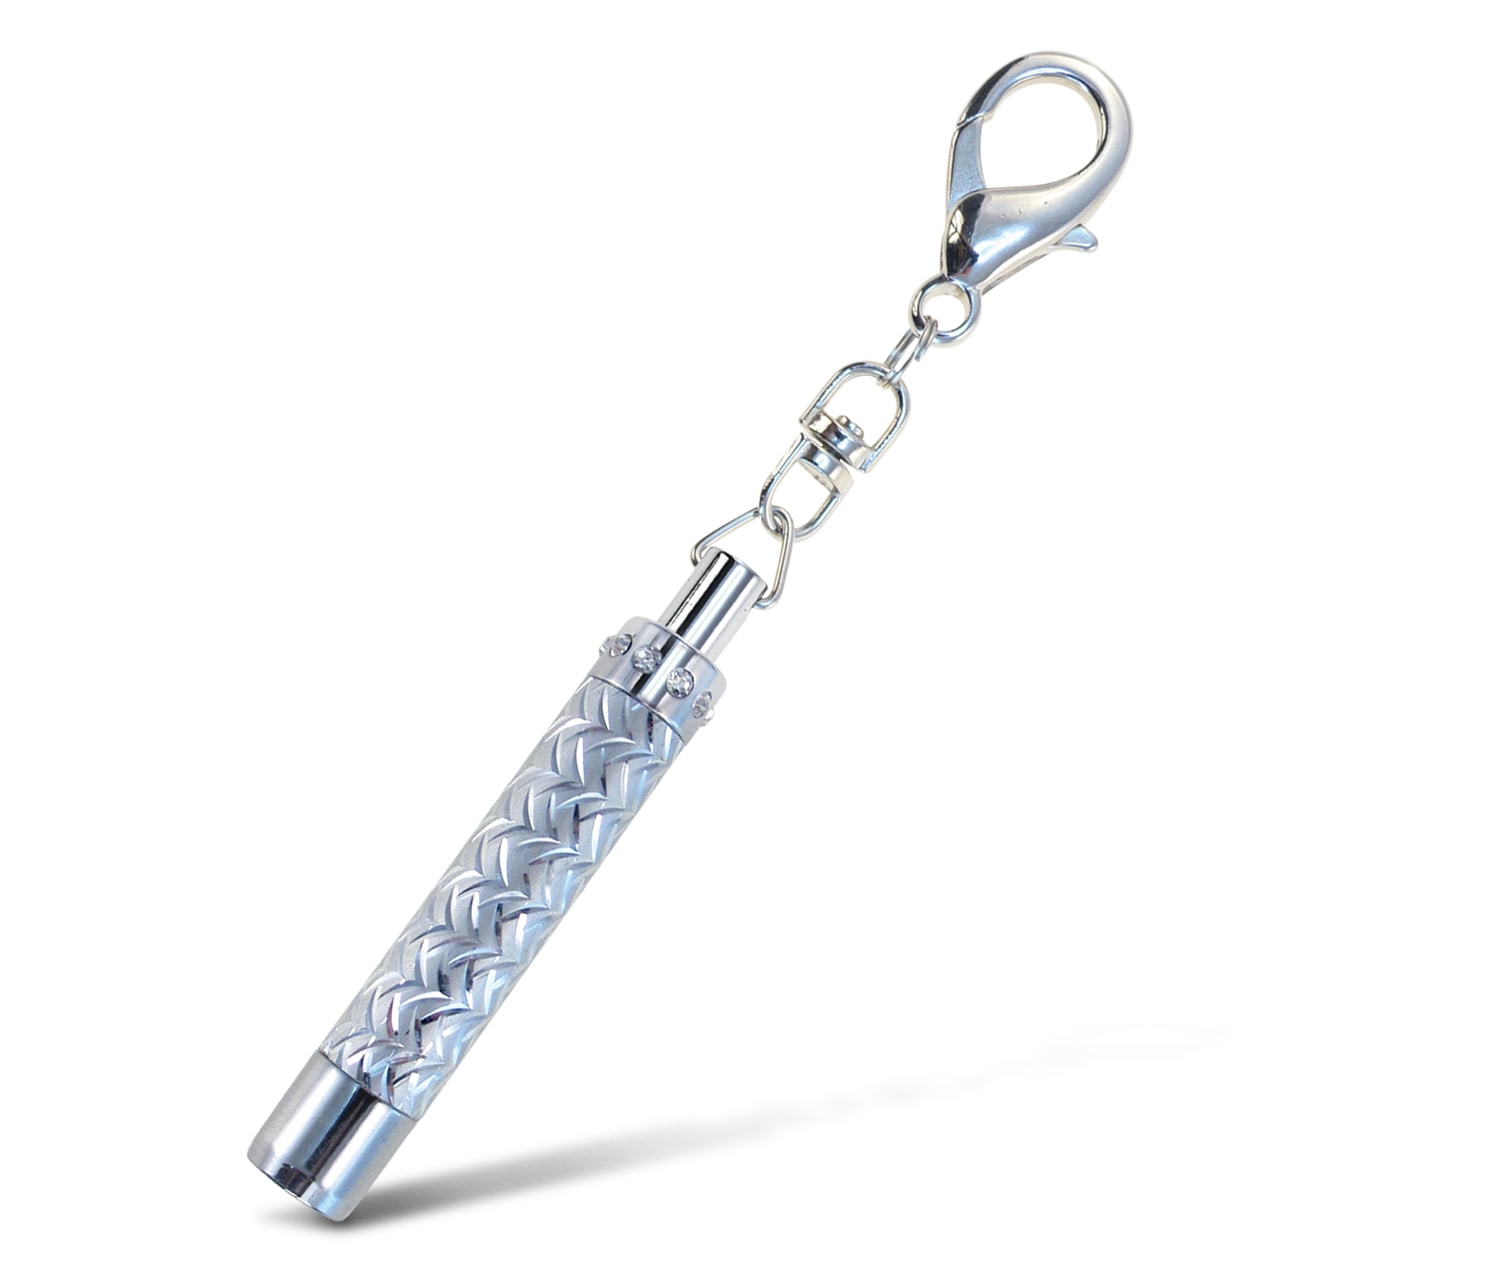 Engraved With Wave Pattern Silver – Sparkling Flashlight